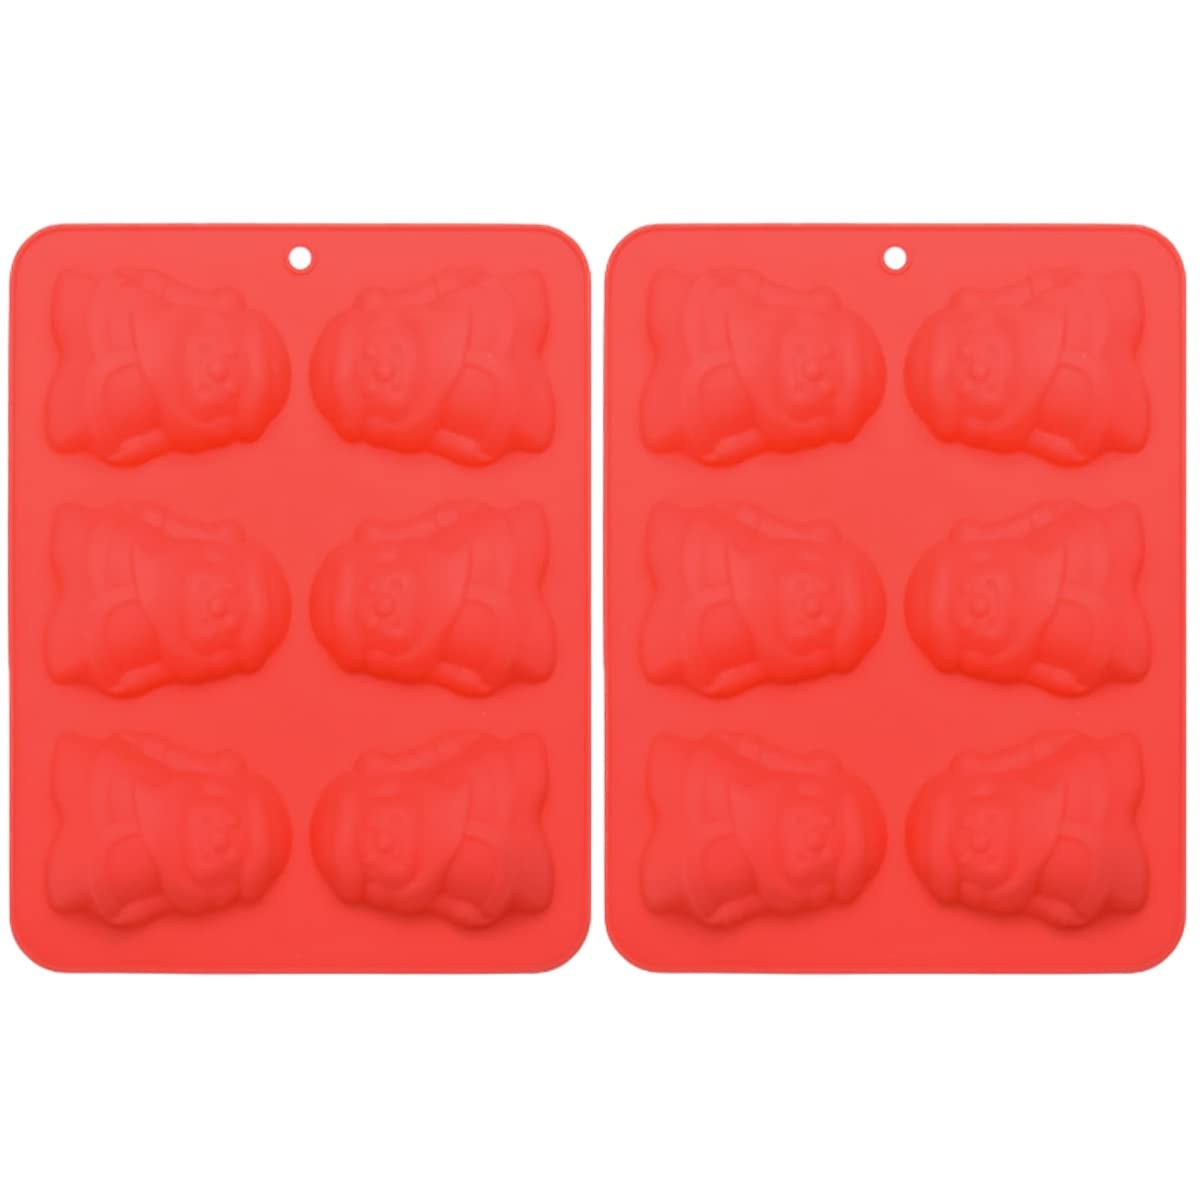 2pcs Christmas Baking Molds Christmas Silicone Molds Kitchen Sugarcraft Christmas Ice Molds Ice Cube Molds Ice Cube Candy Chocolate Santa Claus Mold Silica Gel Baking Cup Bakeware